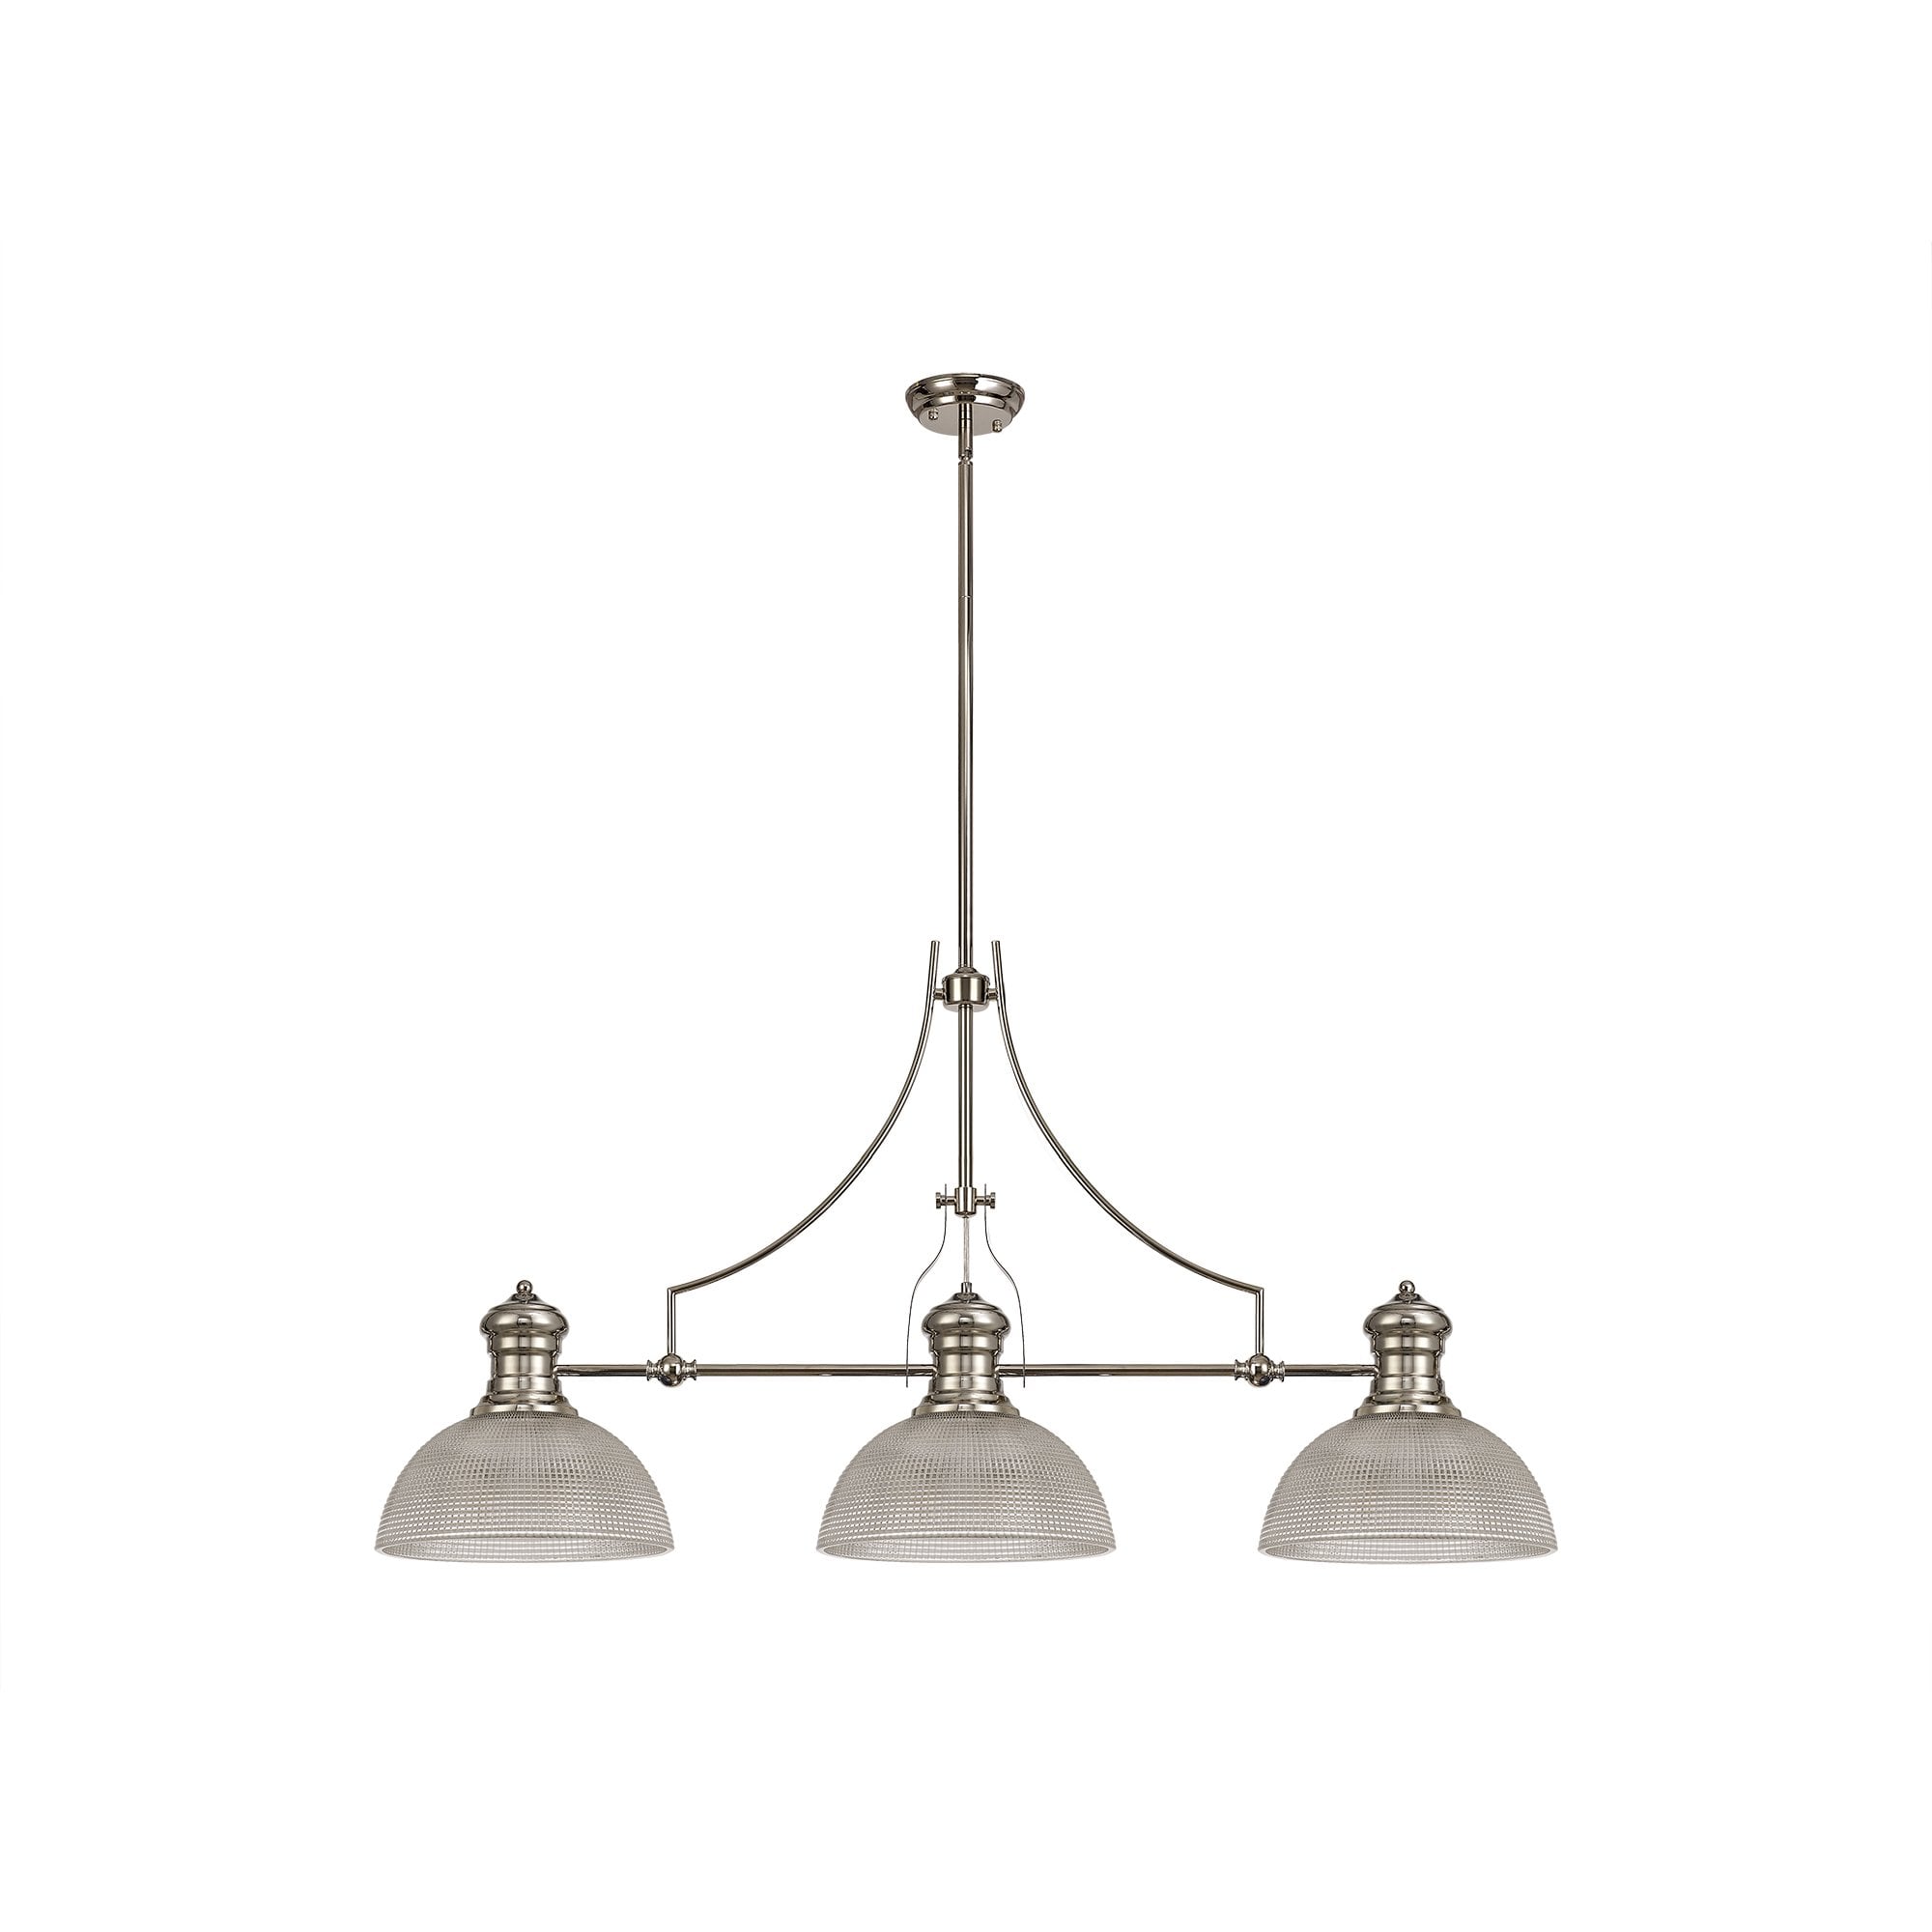 3 Light Telescopic Pendant E27 With 30cm Prismatic Glass Shade, Polished Nickel/Clear